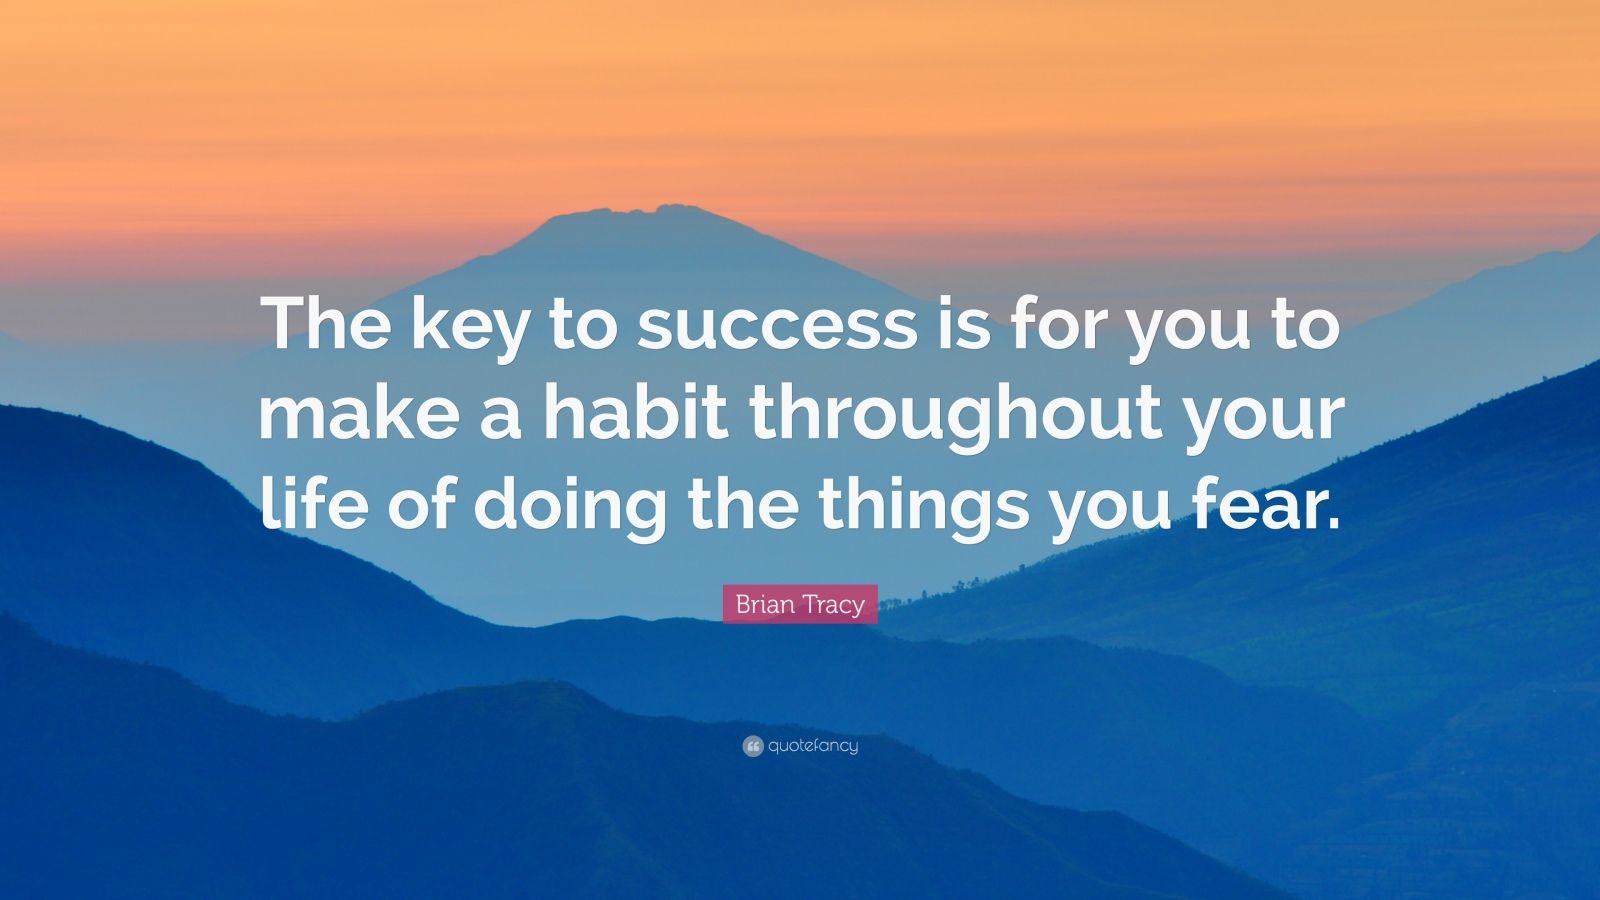 Brian Tracy Quote: “The key to success is for you to make a habit